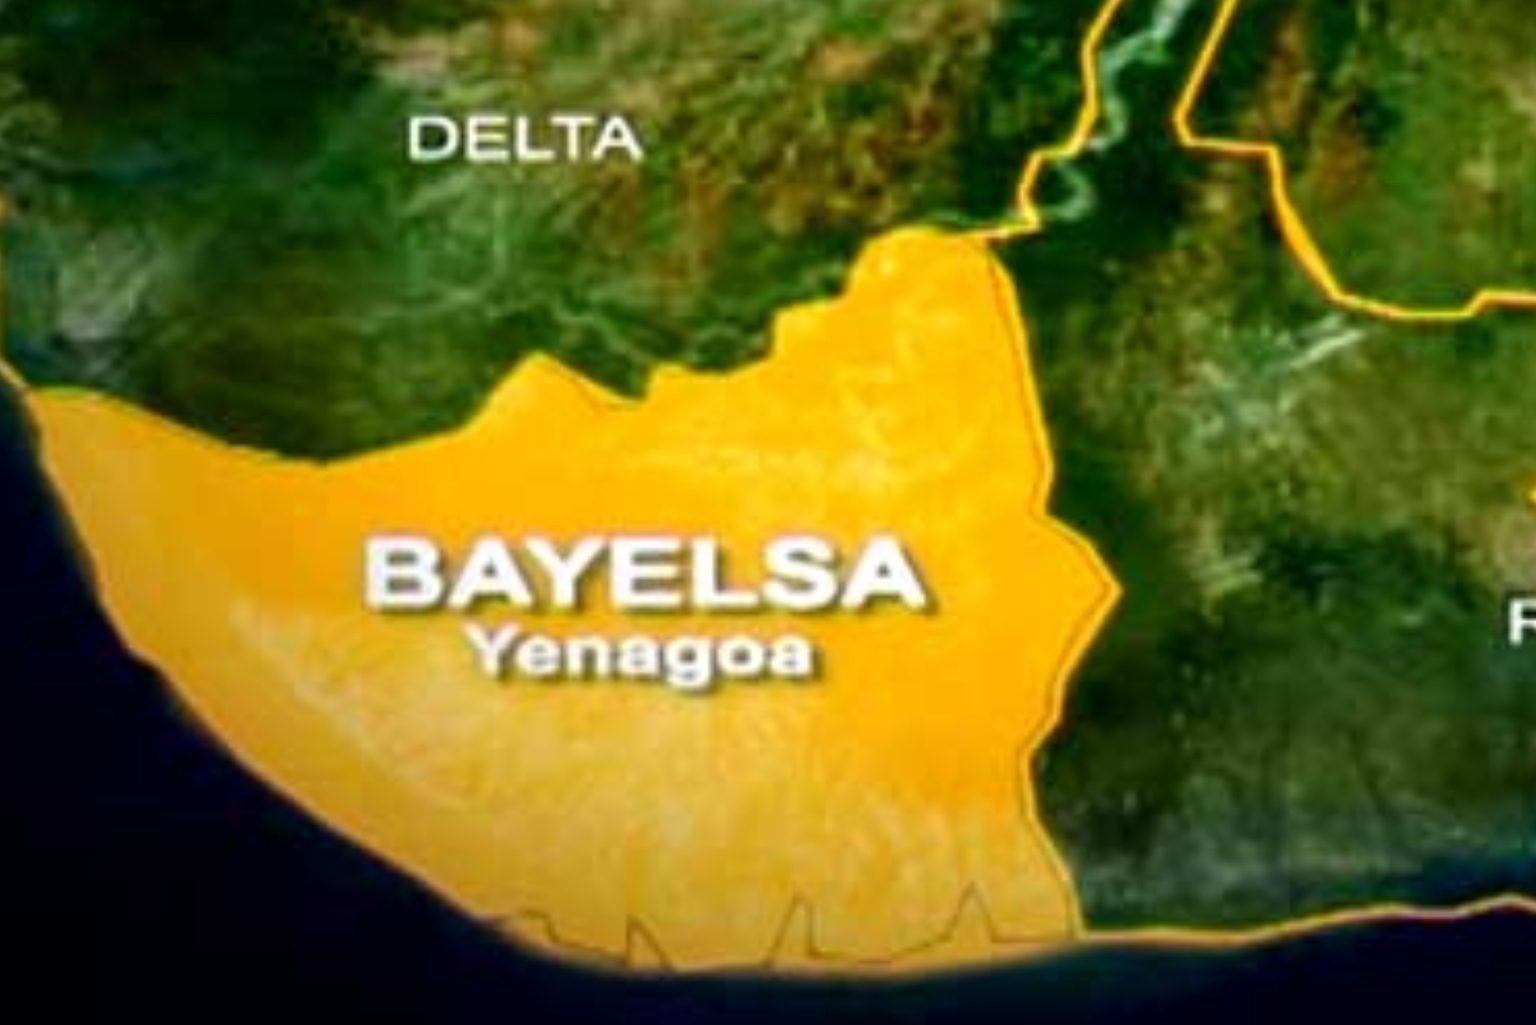 Youths of Okumoni Community, Okordia clan, in Yenagoa Local Government Area of Bayelsa State, have warned that they may be forced into a reprisal attack as self-defence if the killings of innocent indigenes continue. DAILY POST gathered that two chiefs from Zarama and Okumoni communities both in the Okordia clan were allegedly killed while several others were injured in an attack by herdsmen a week ago. According to the Ijaw Youths Council, IYC, Chairman, Okordia clan, Comrade Raymond Akadumeme, the people can no longer watch herdsmen kill their people, and the security operatives keep mute, adding that it is unacceptable, and they can’t continue living in silence.